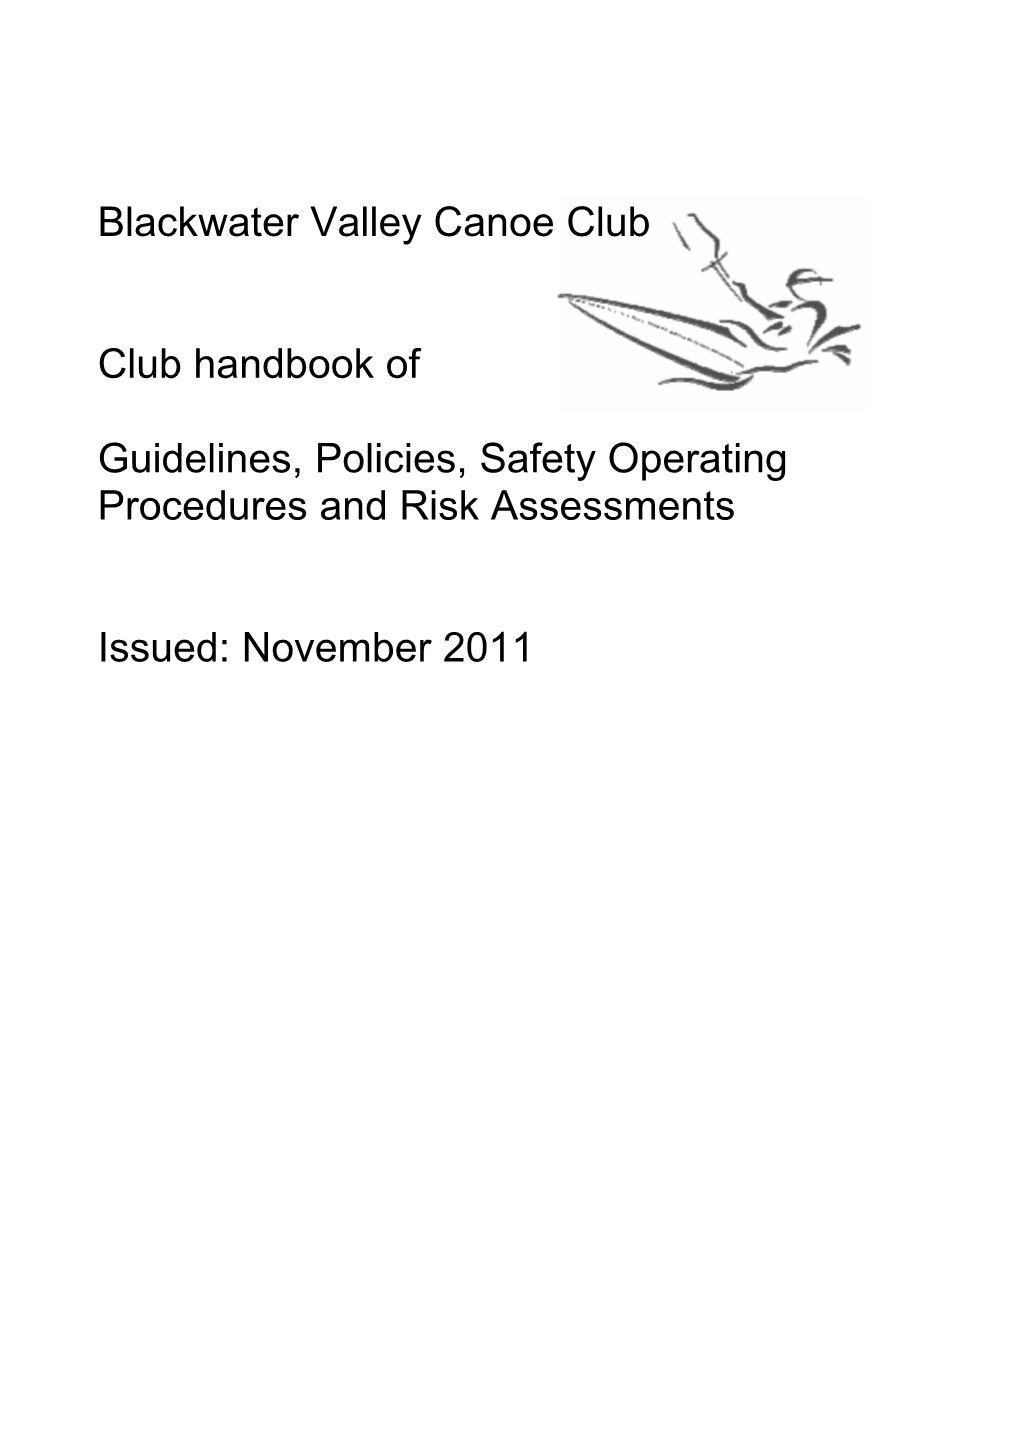 BVCC Operating Guideline Policies Risk Assessments